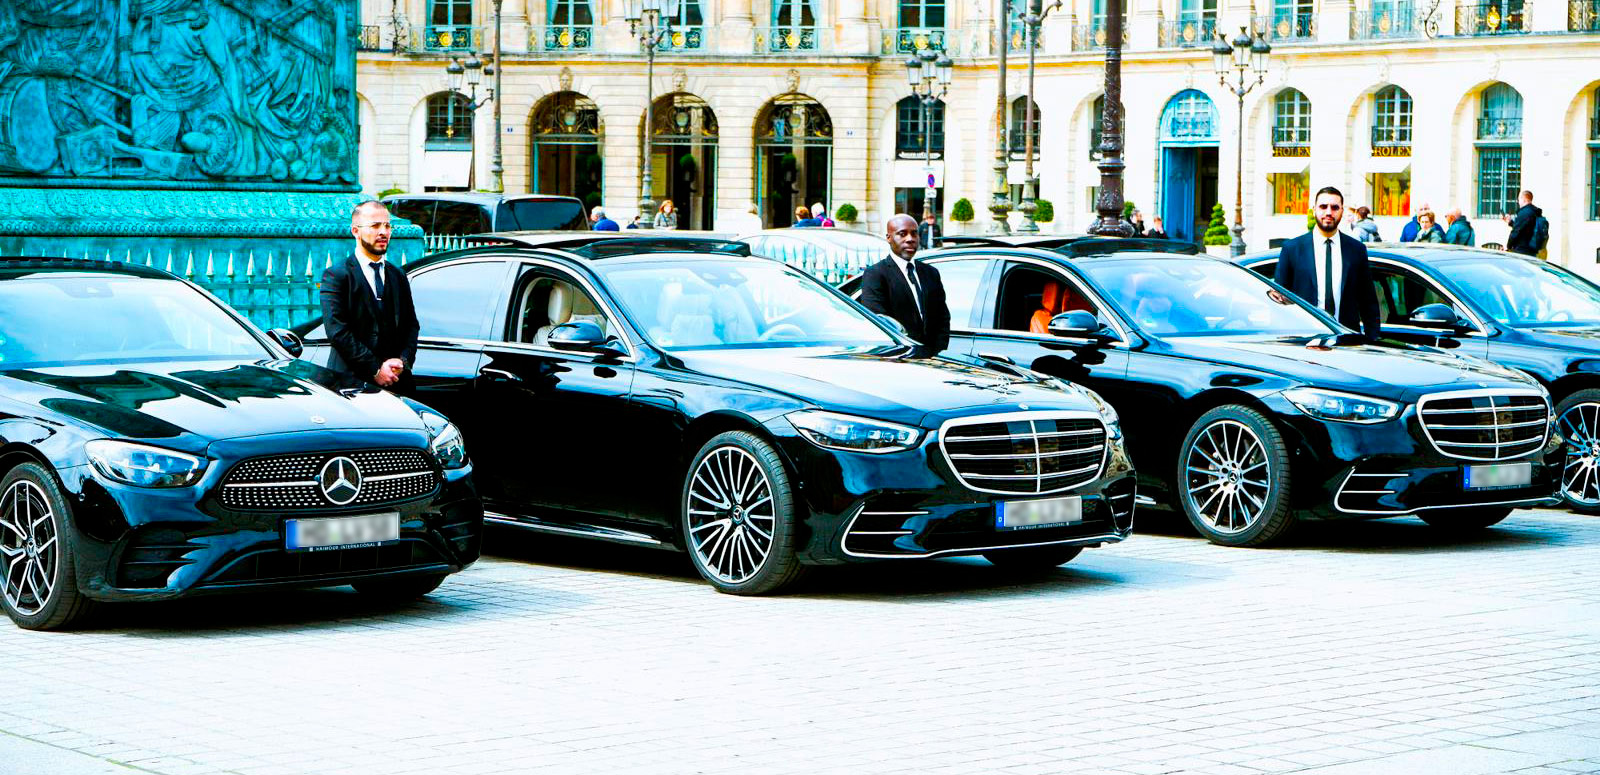 Private chauffeur service and luxury car rental